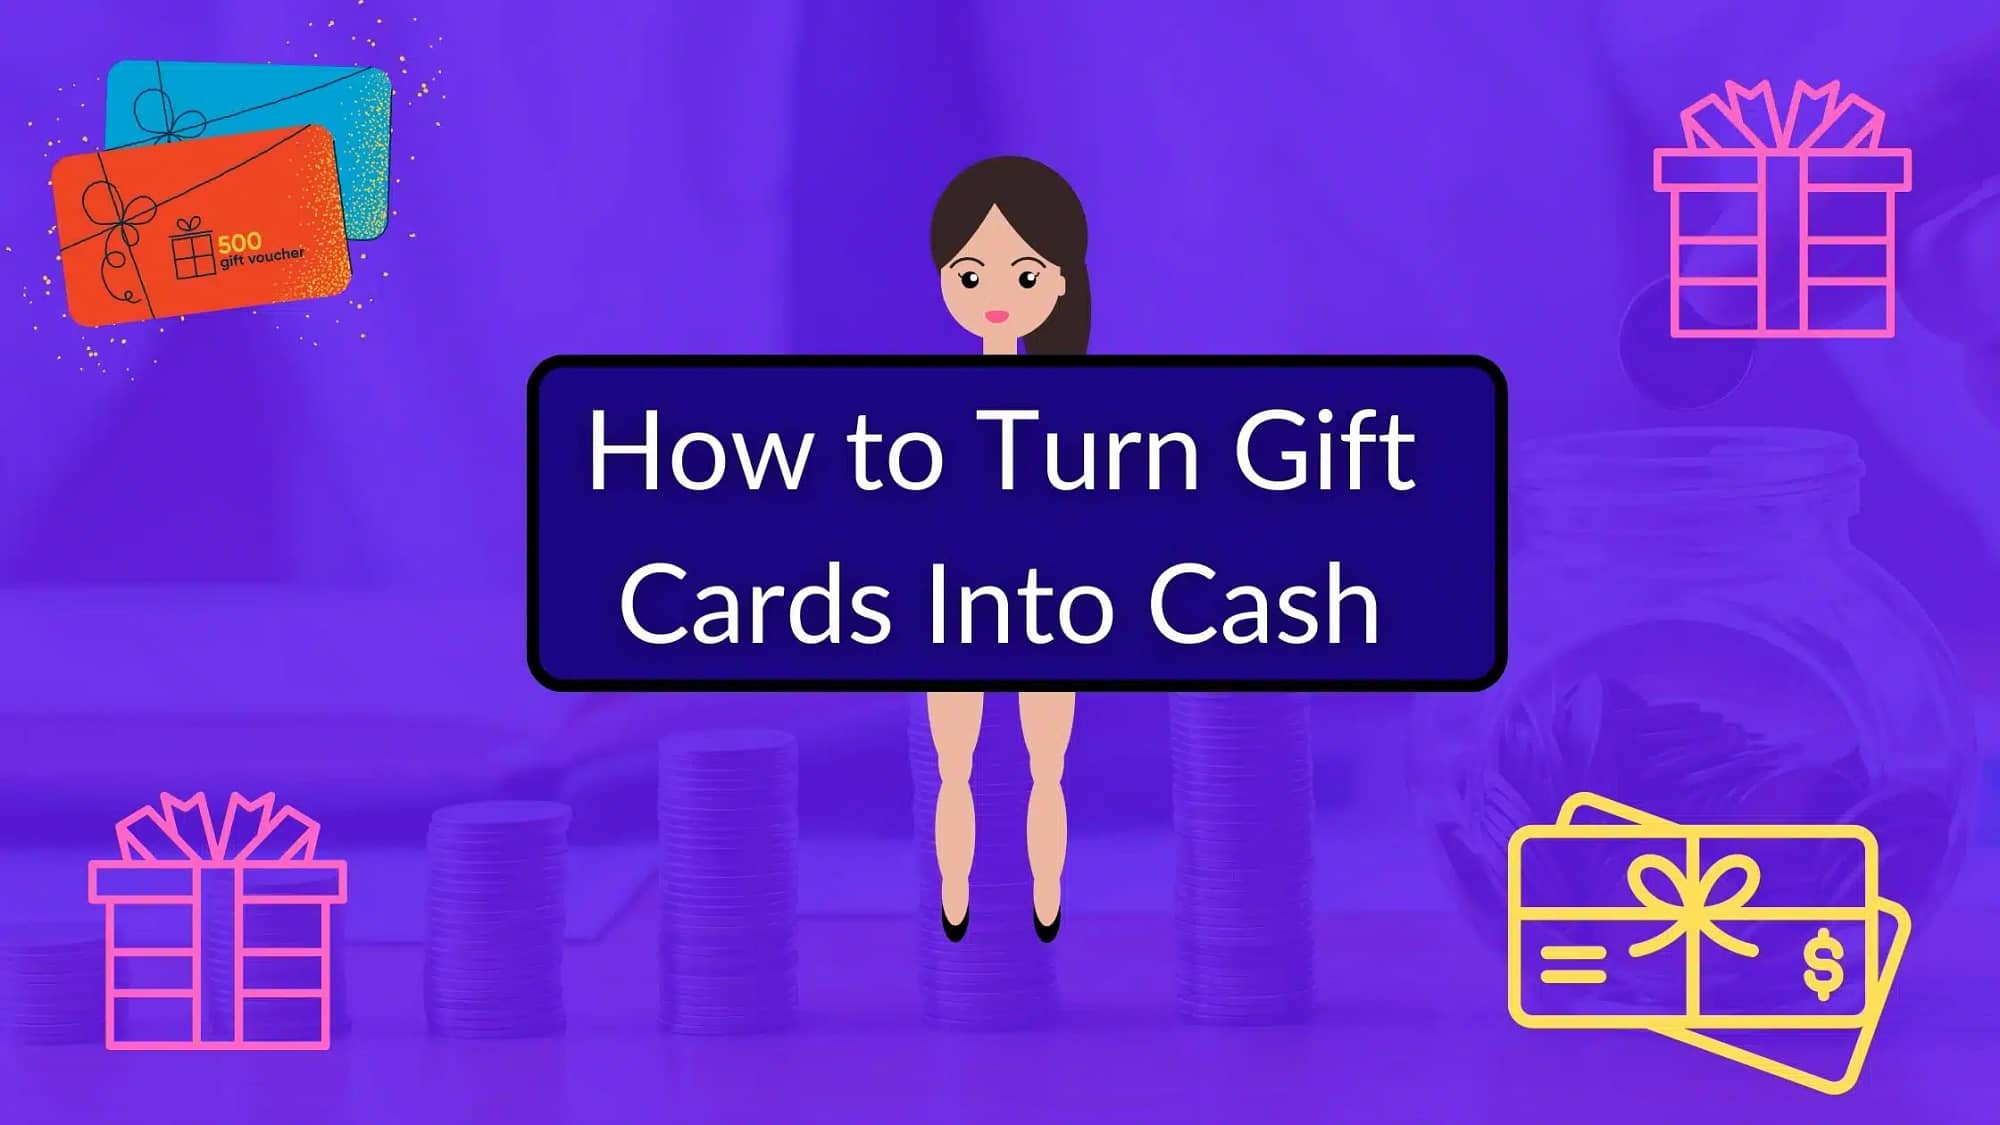 Can you convert gift card how to turn gift cards into cash online turn gift cards into cash instantly turn gift cards into cash near me how to convert gift card to cash in amazon how to convert gift card to cash paypal gift card exchange turn gift cards into cash at walmart how to turn gift cards into cash to cash? How can I turn a gift card into cash instantly? Where can I turn my gift cards into cash? How do you get cash out of a gift card?